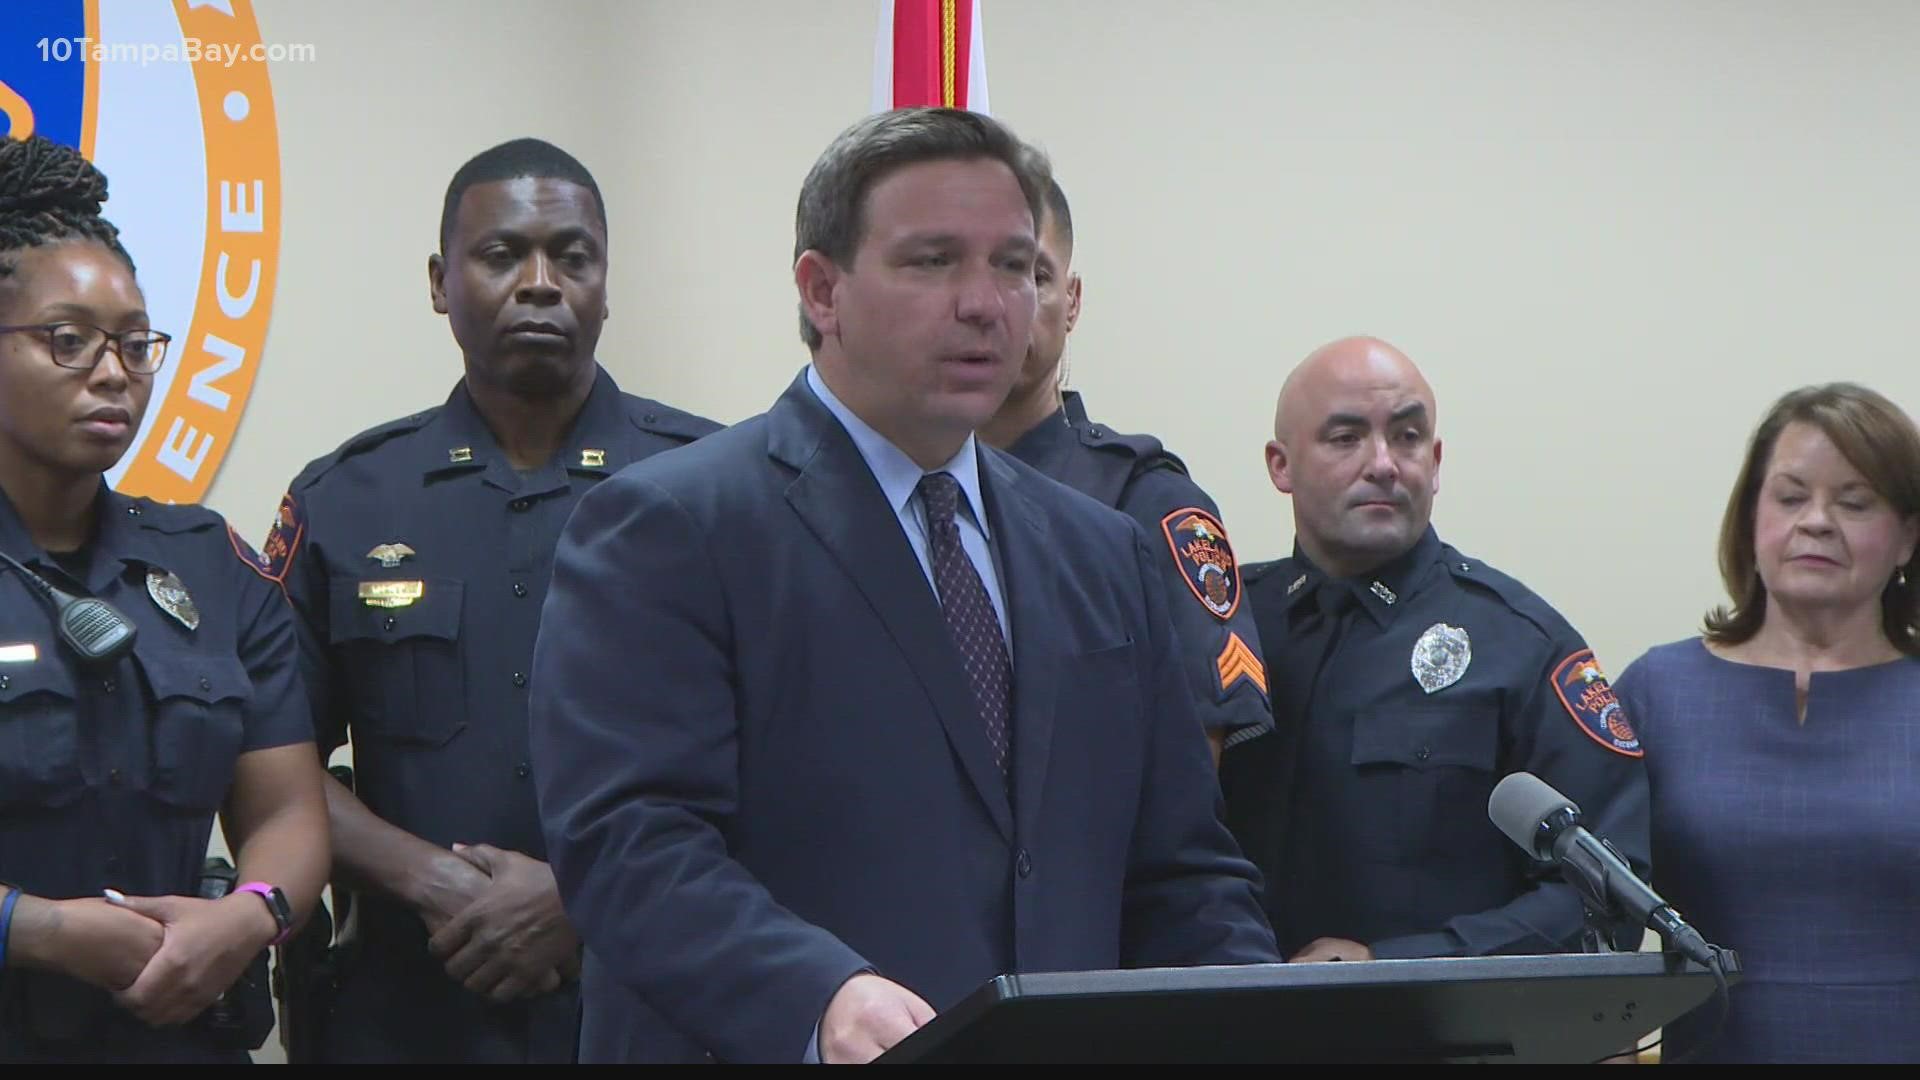 The governor also mentioned law enforcement training scholarships during a news conference in Lakeland.